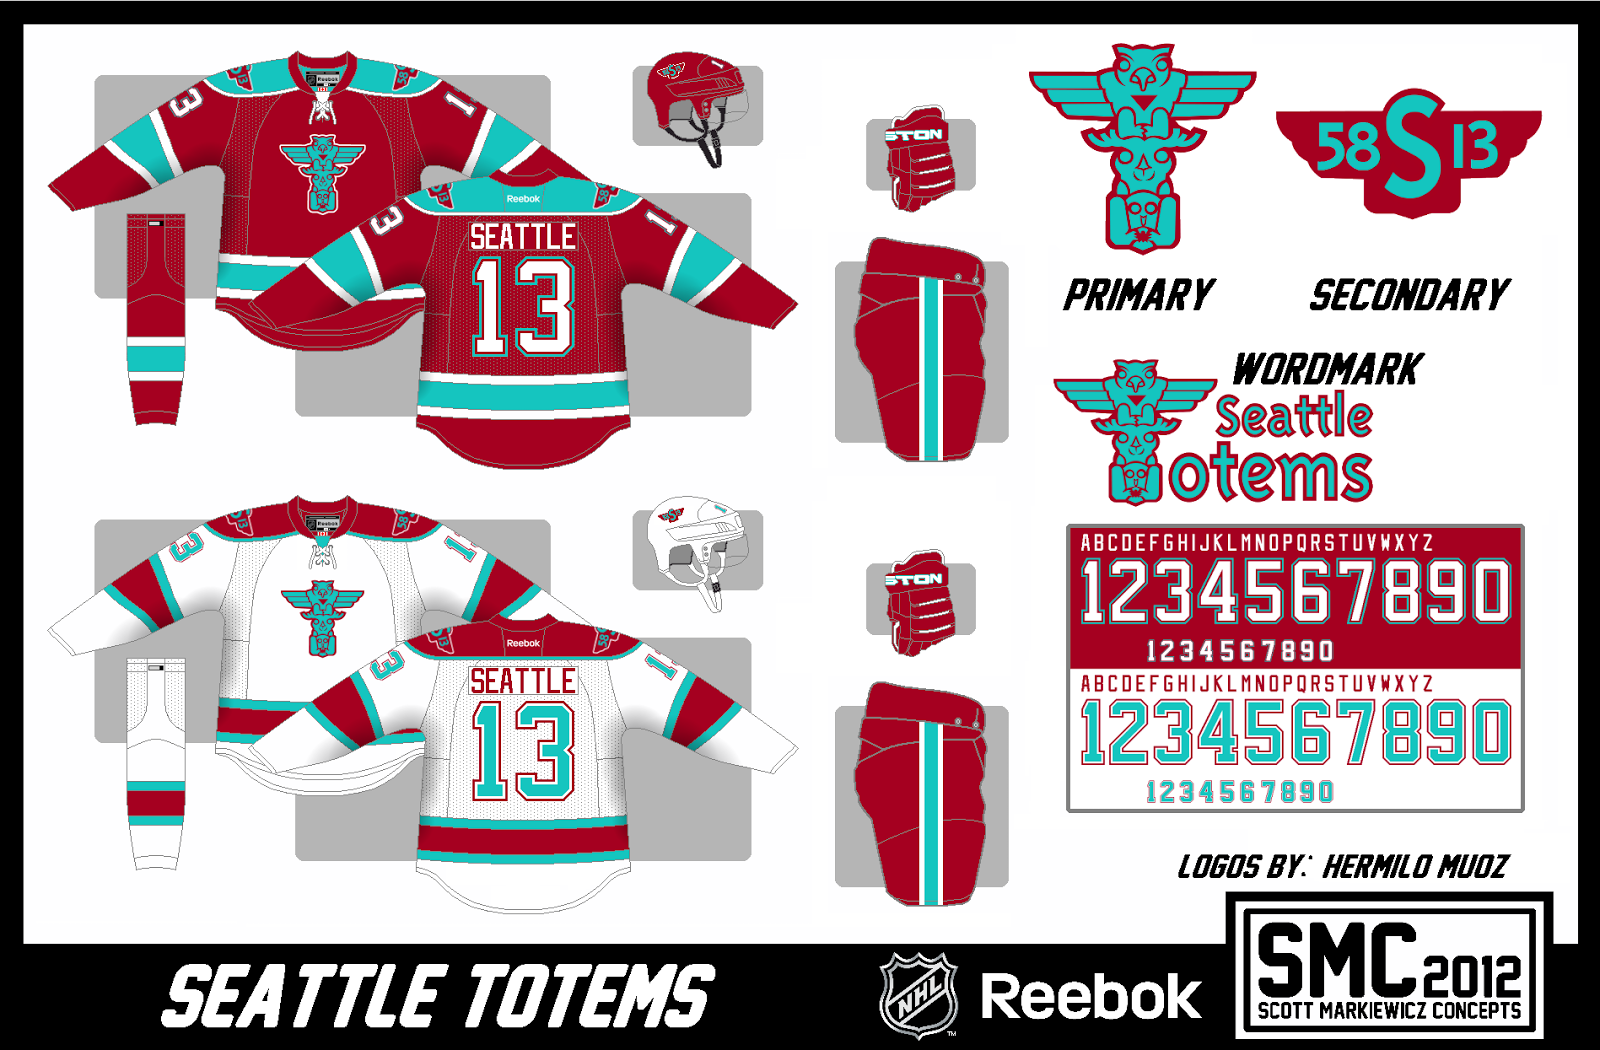 NHL13 Offers a Preview of Several New AHL Uniforms – SportsLogos